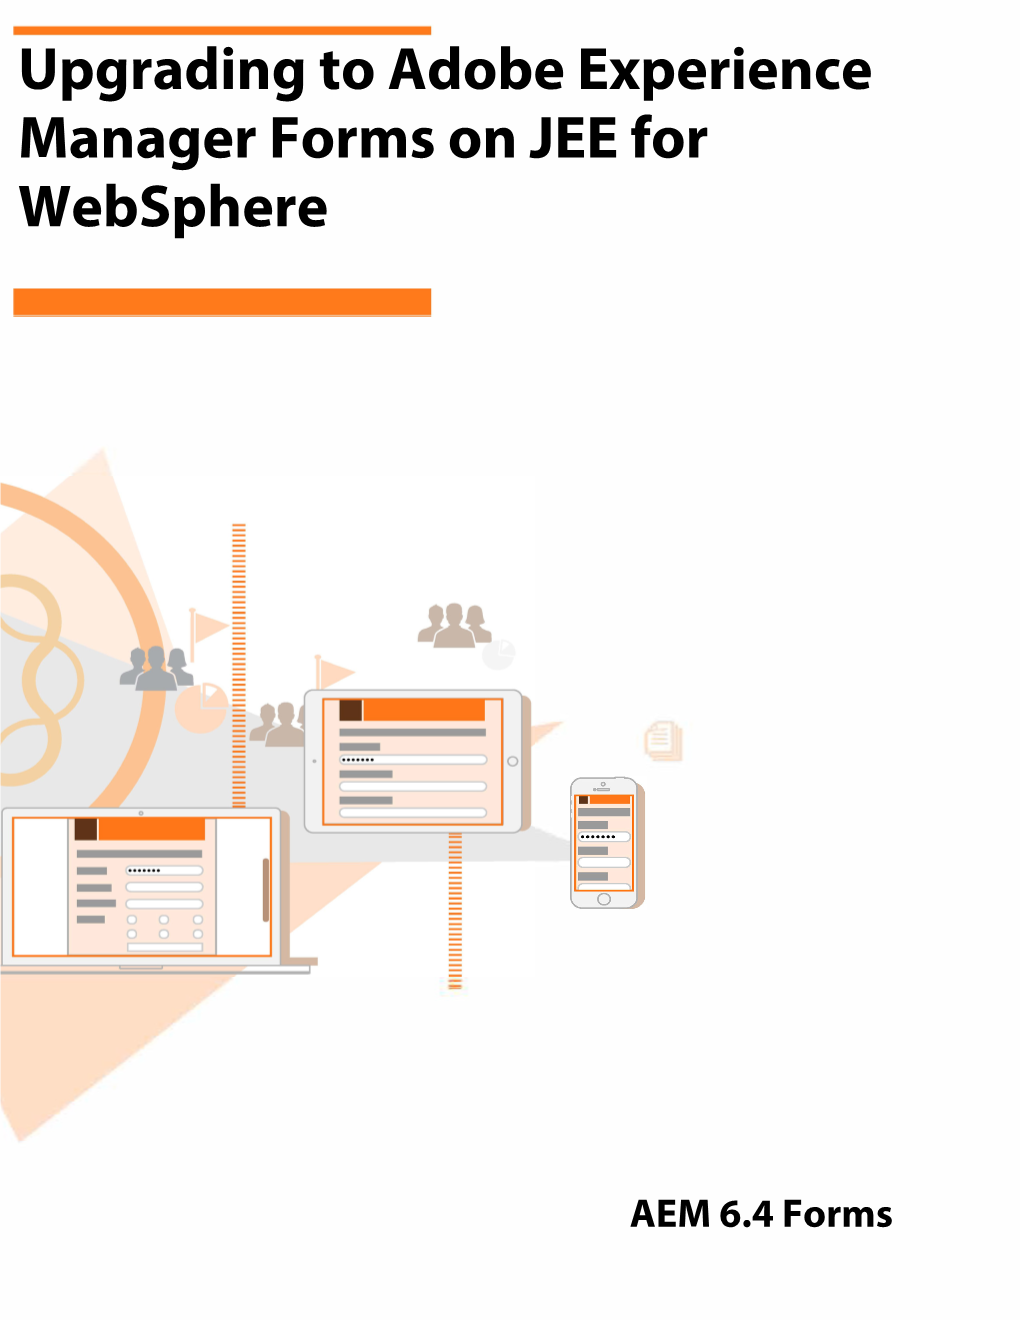 Upgrading to Adobe Experience Manager Forms on JEE for Websphere